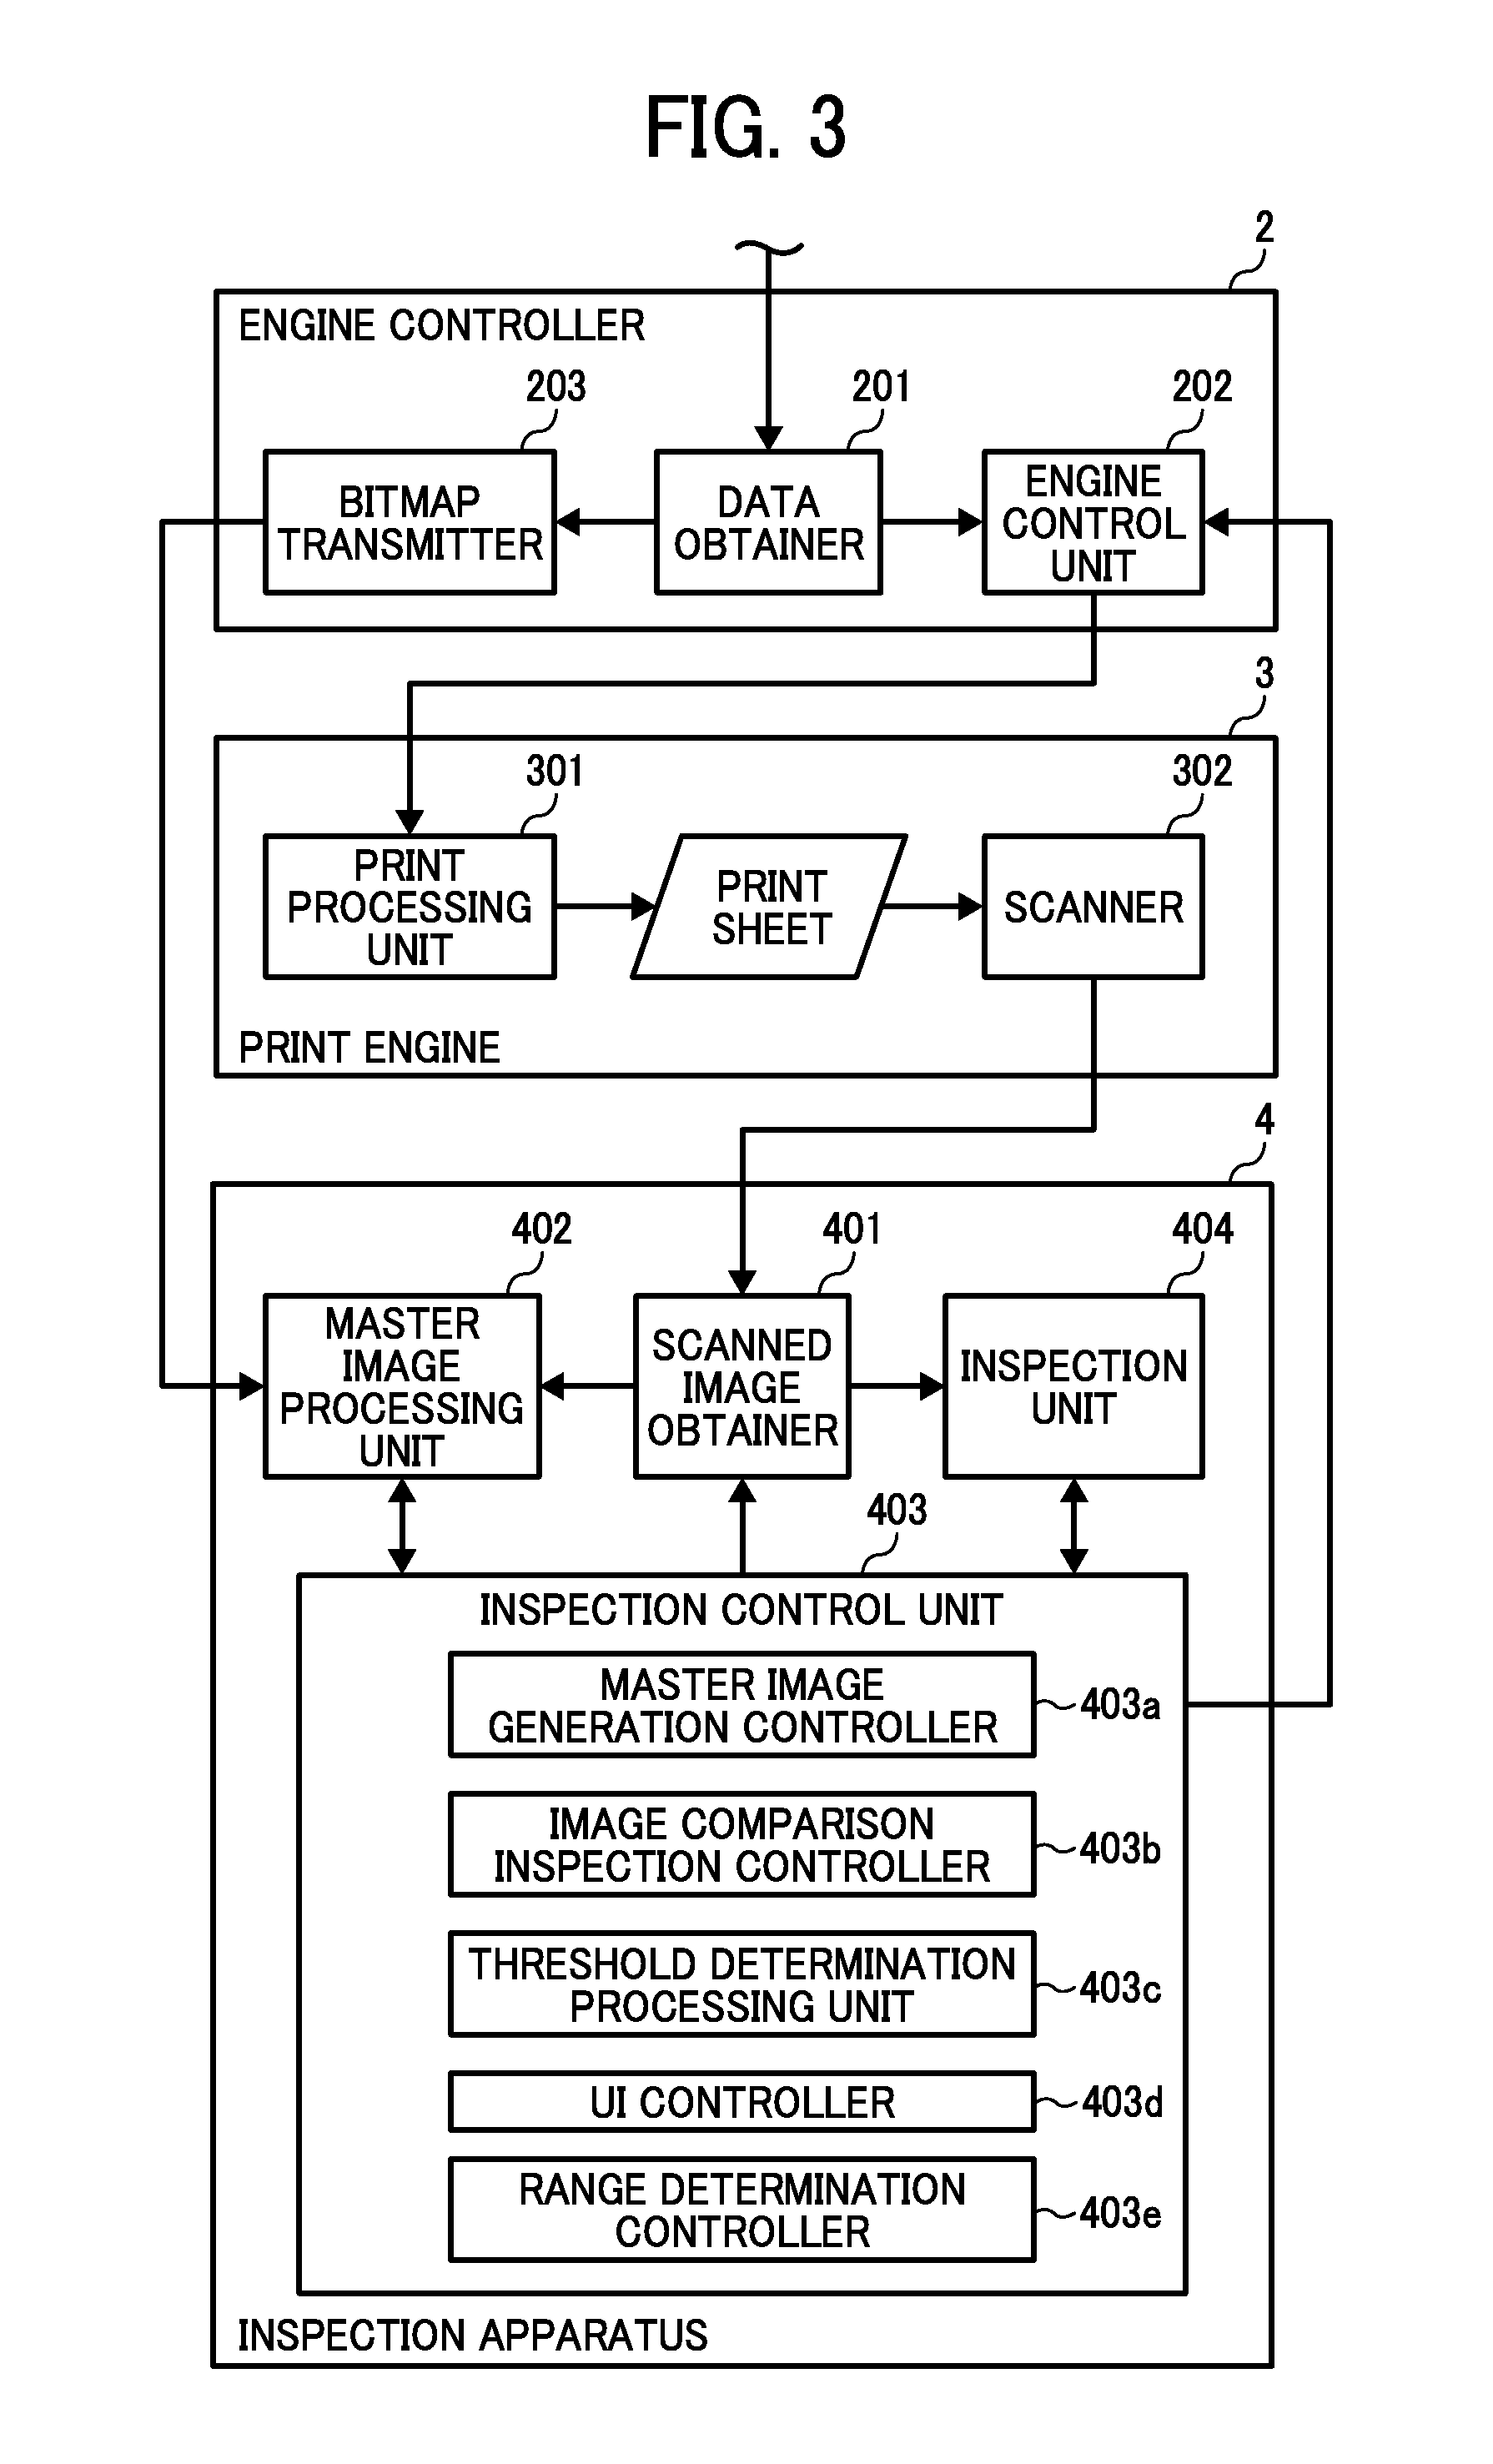 Image inspection apparatus, image inspection system and image inspection method